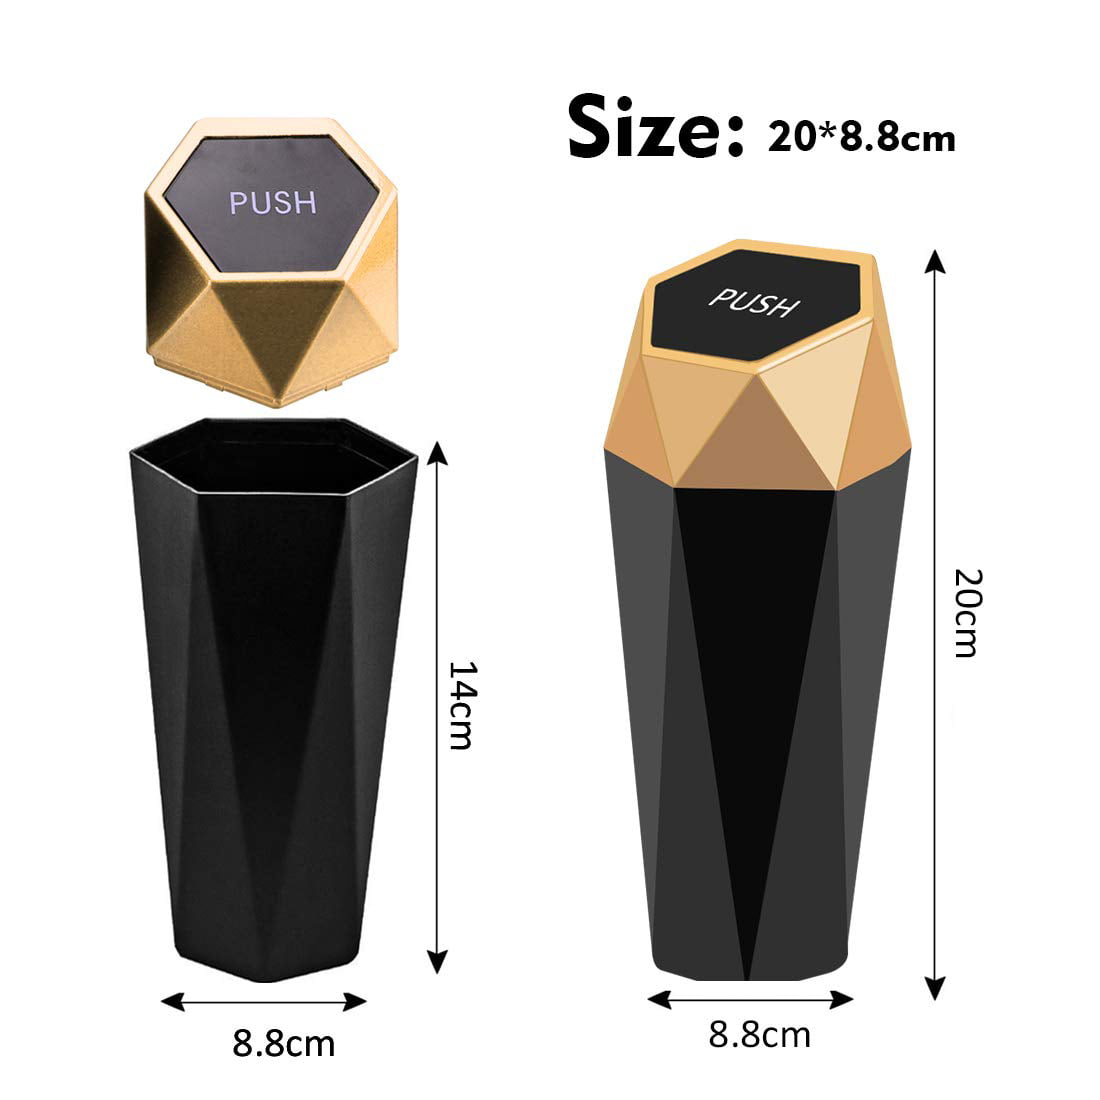 Mini Car Trash Can with Lid, New Car Dustbin Diamond Design, Mini Garbage Bin for Automotive Car, Home, Office, Kitchen, Bedroom 2pcs（Size: 7.8X 3X 3 inch 